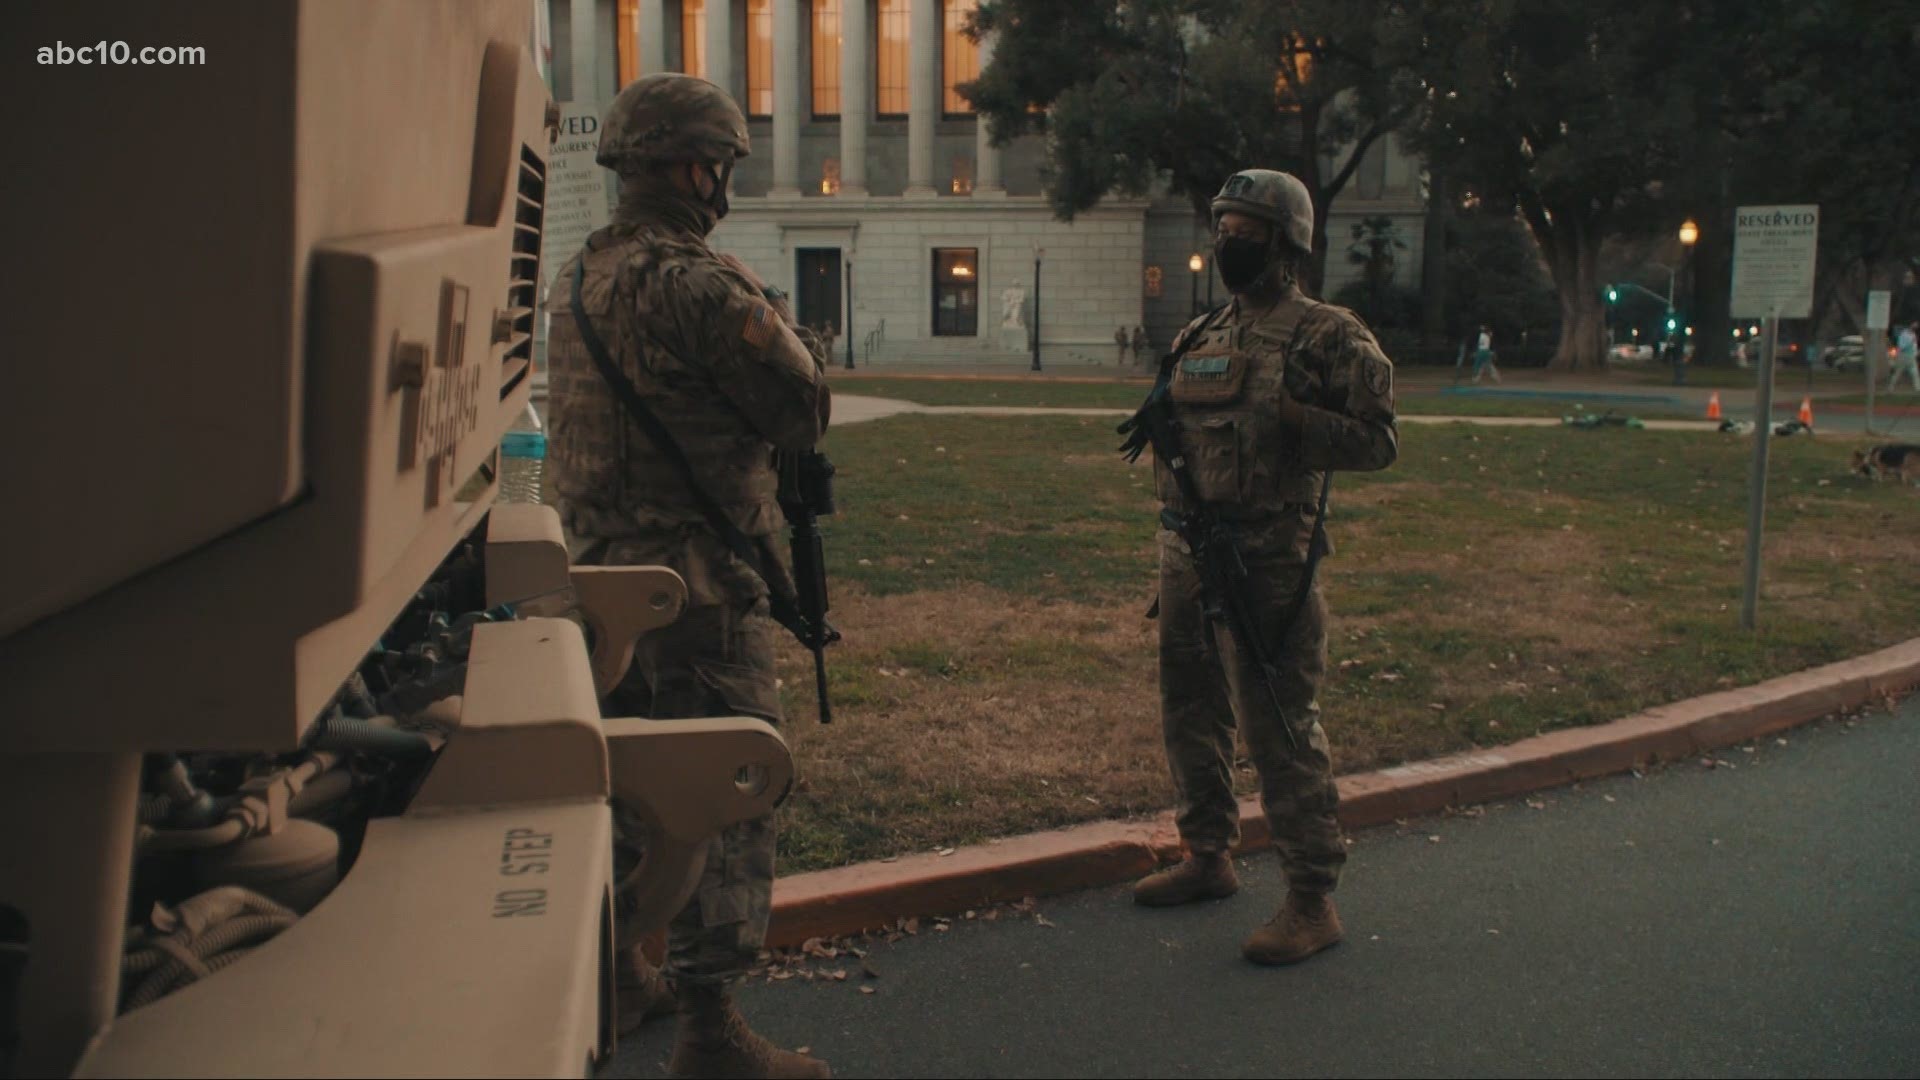 So far it has been quiet at the Capitol and in downtown Sacramento, but Sacramento law enforcement and the National Guard are staying prepared.